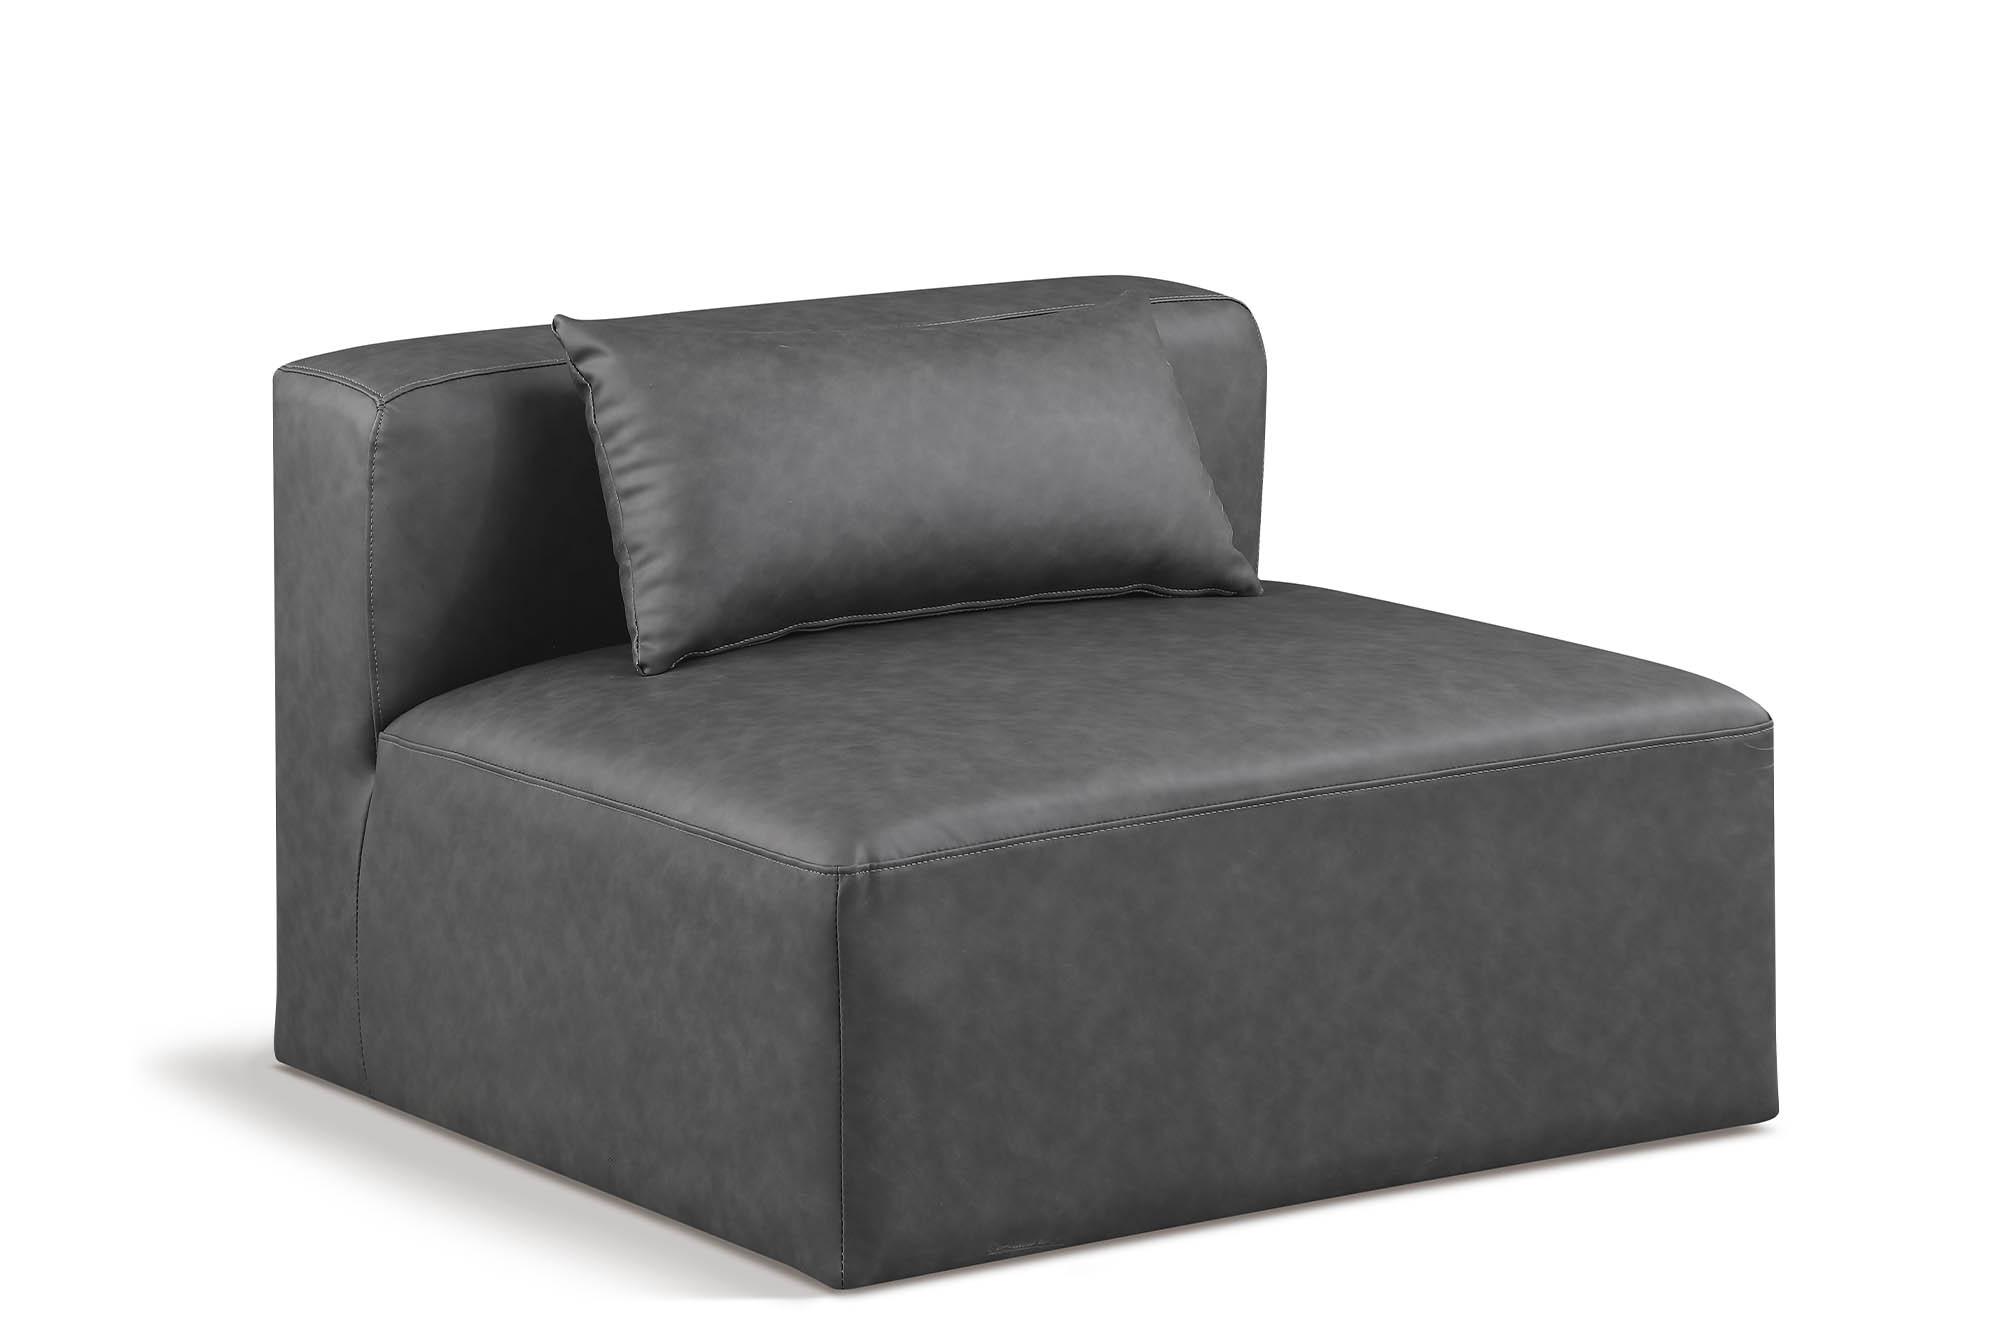 Contemporary, Modern Armless Chair CUBE 668Grey-Armless 668Grey-Armless in Gray Faux Leather